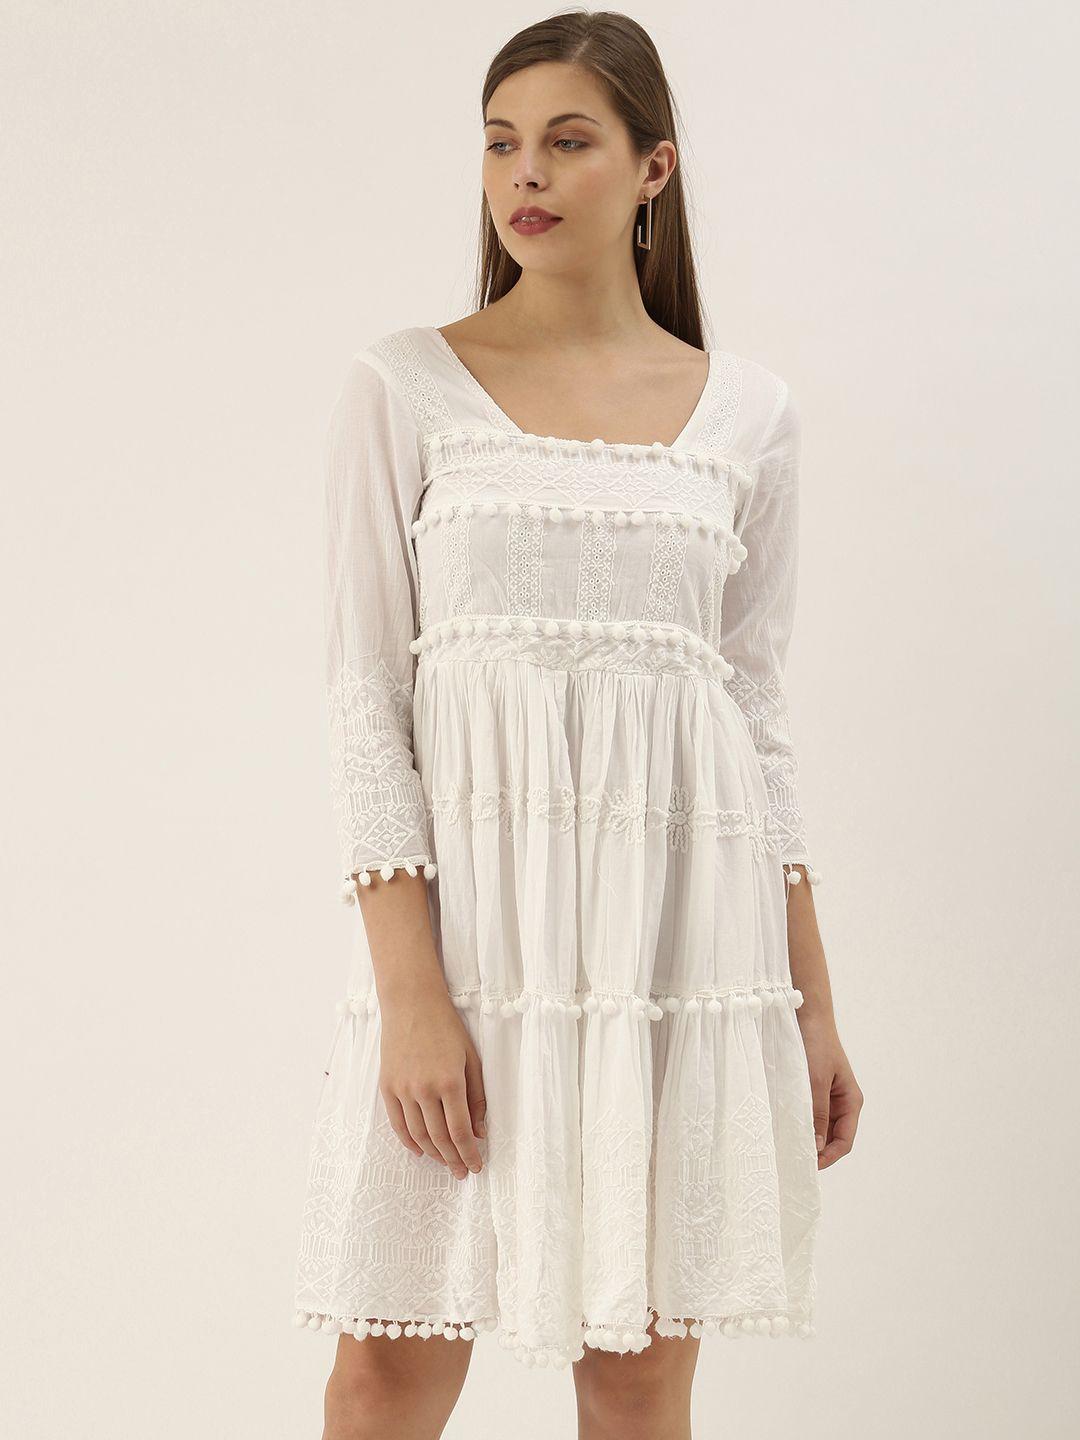 saanjh women white embroidered tiered fit and flare dress with pom pom detailing